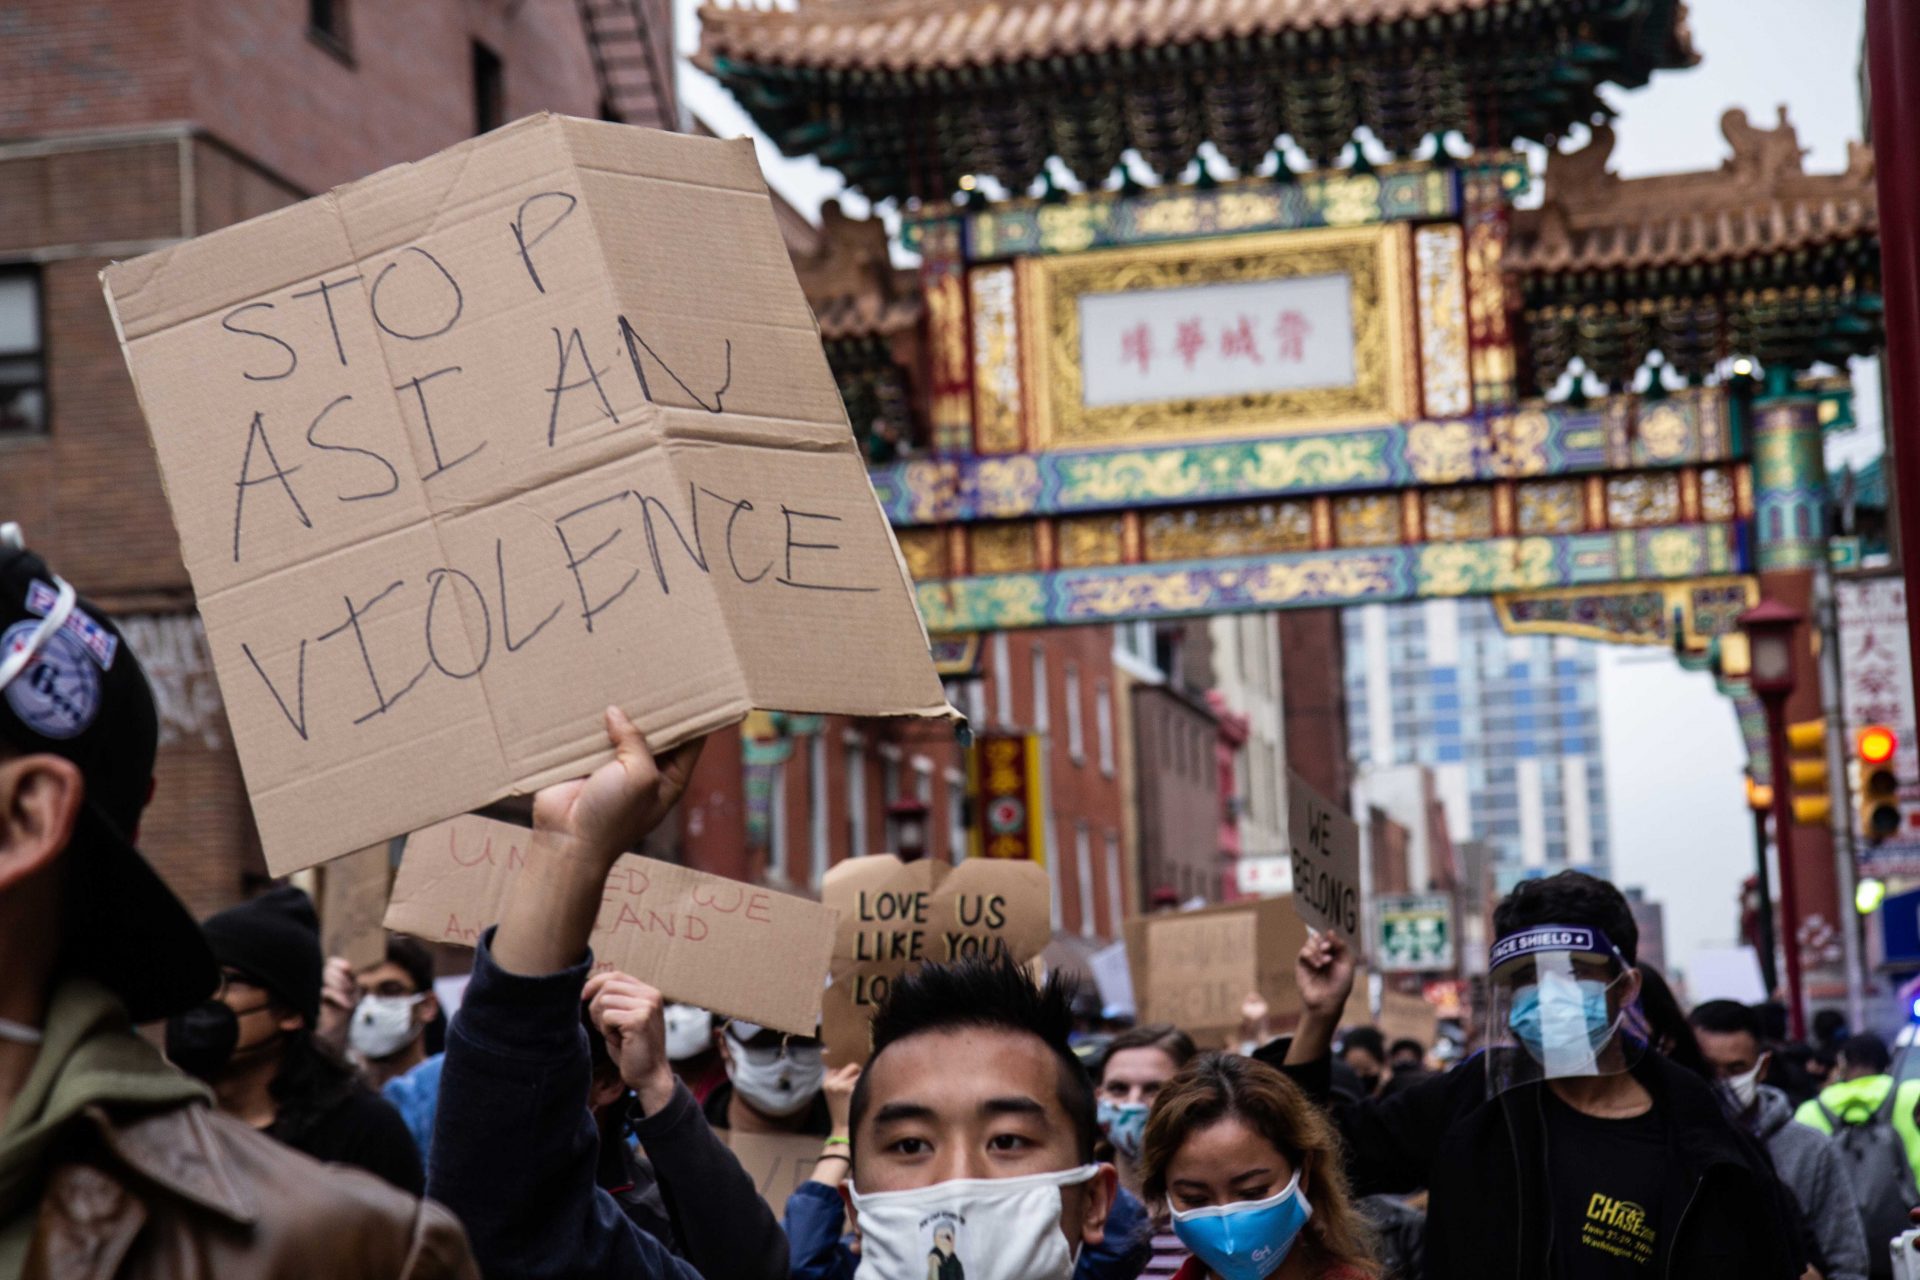 Philadelphians gathered on 10th Street in Chinatown for a solidarity rally and march against violence directed at Asian Americans on March 25, 2021.